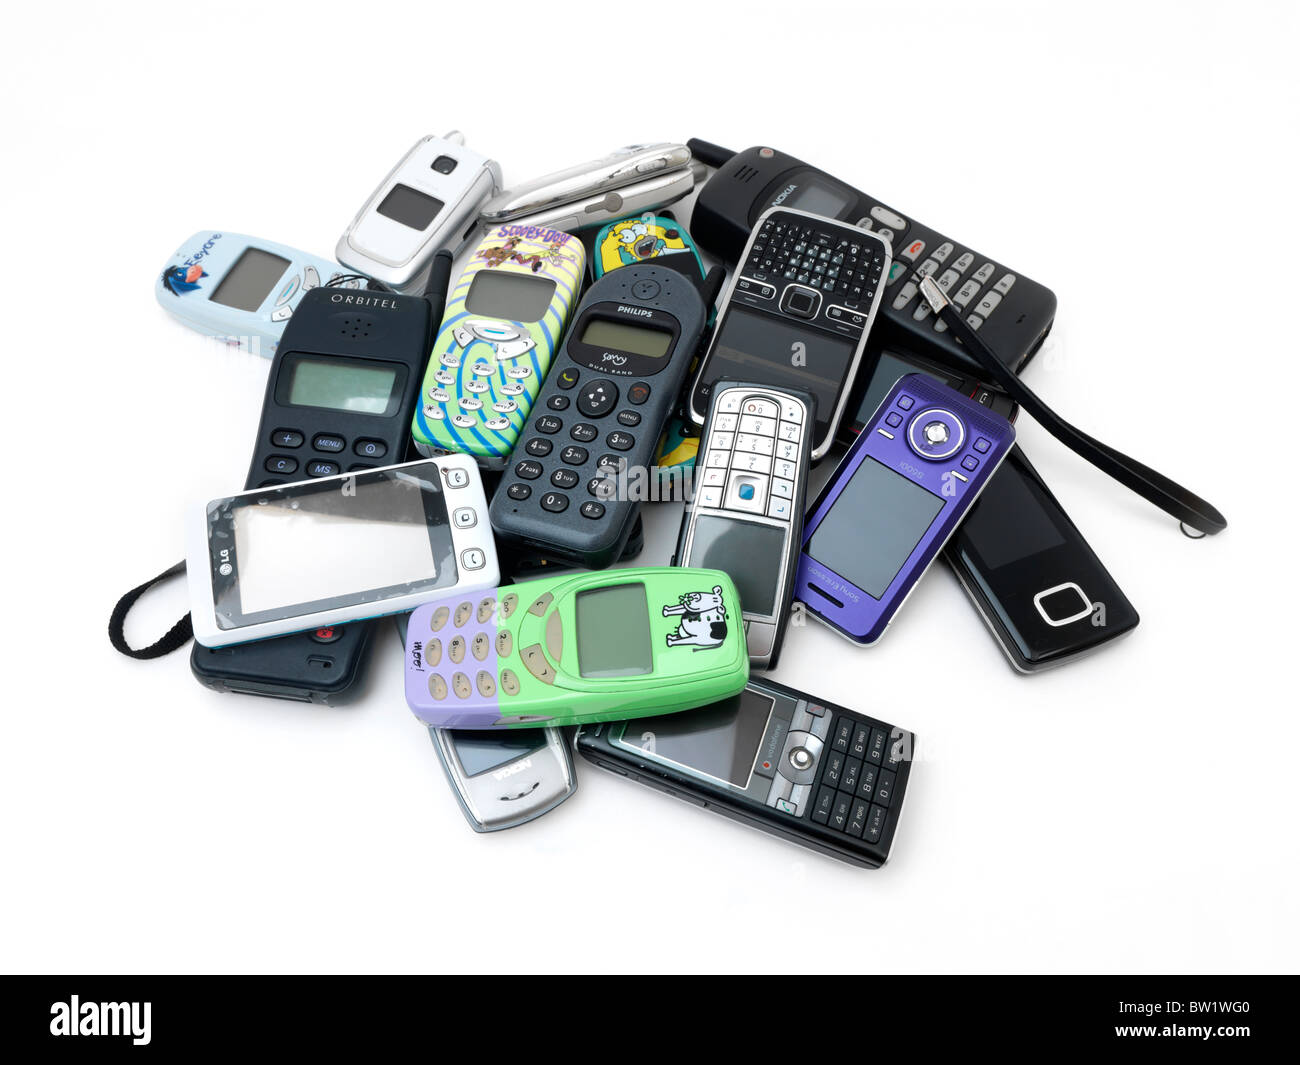 A Pile Of Old And New Mobile Phones Nokia, Samsung, LG, Motorola, Phillips And Sony Ericsson Stock Photo